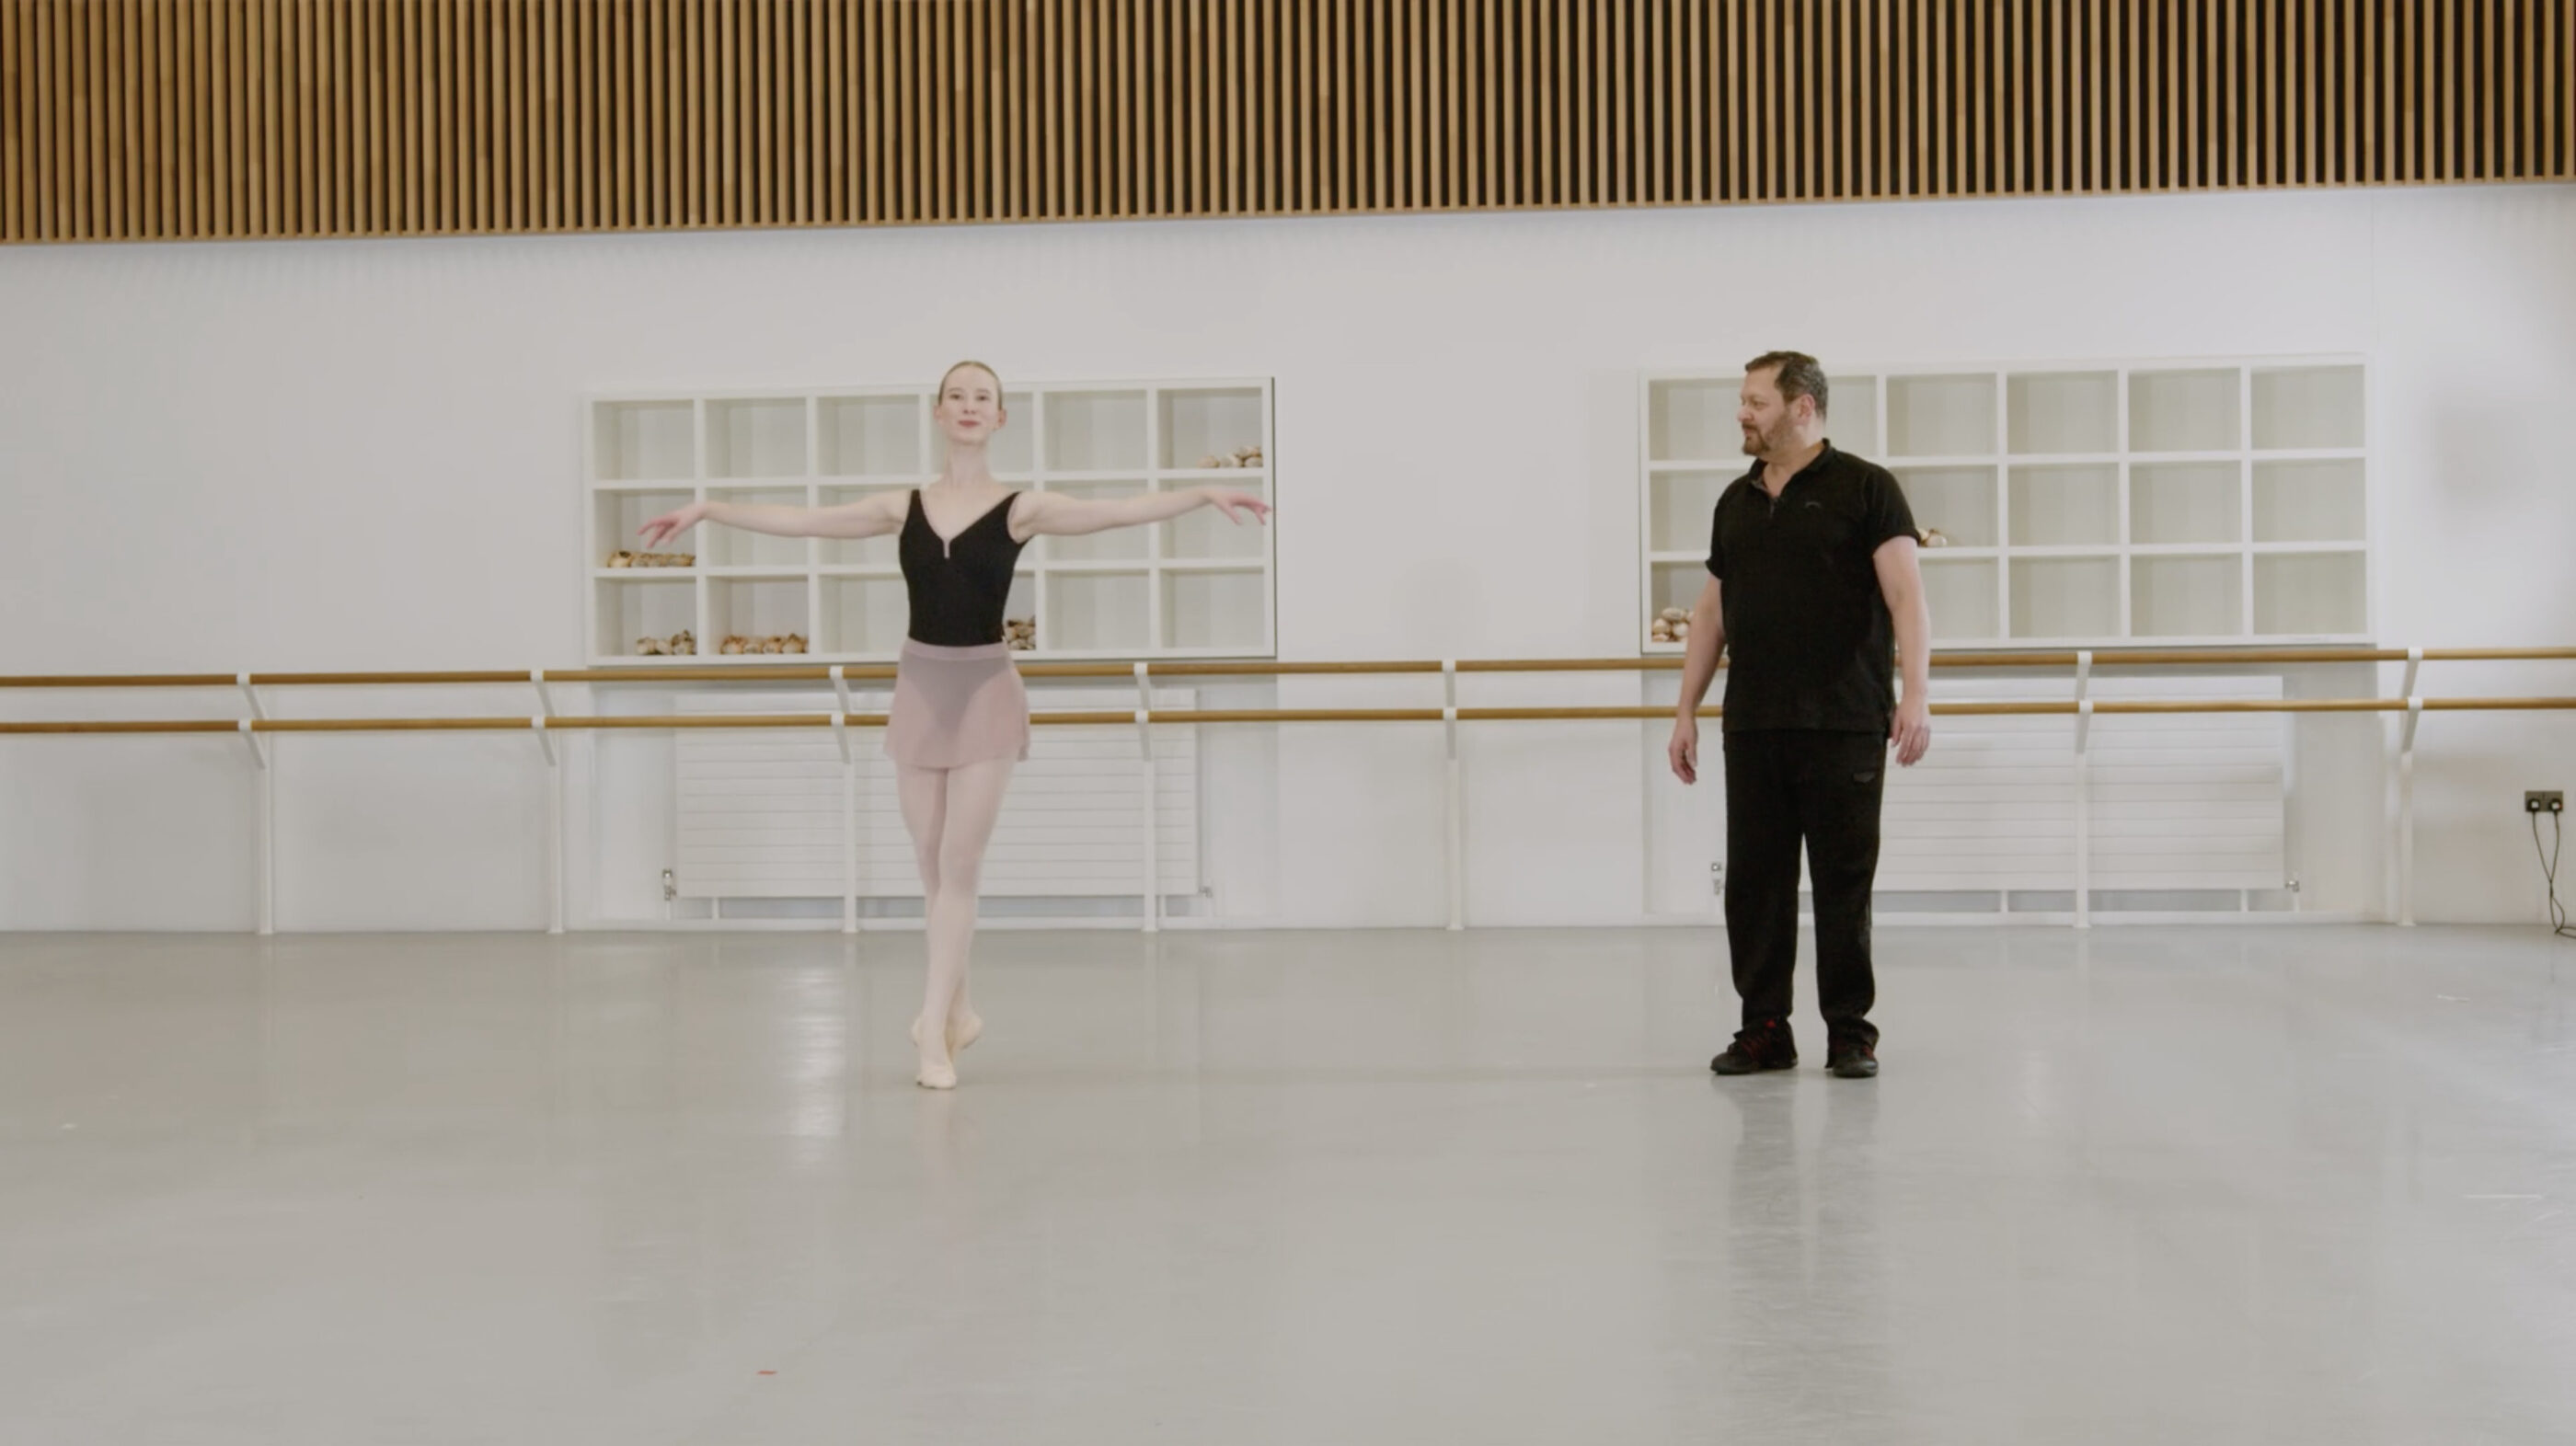 A ballet teacher and a demonstrator are in a bright dance studio. The demonstrator is on her toes while doing a pas de bourree while the teacher is looking towards her. The demonstrator is wearing a black leotard and pink skirt while the teacher is wearing black clothing.